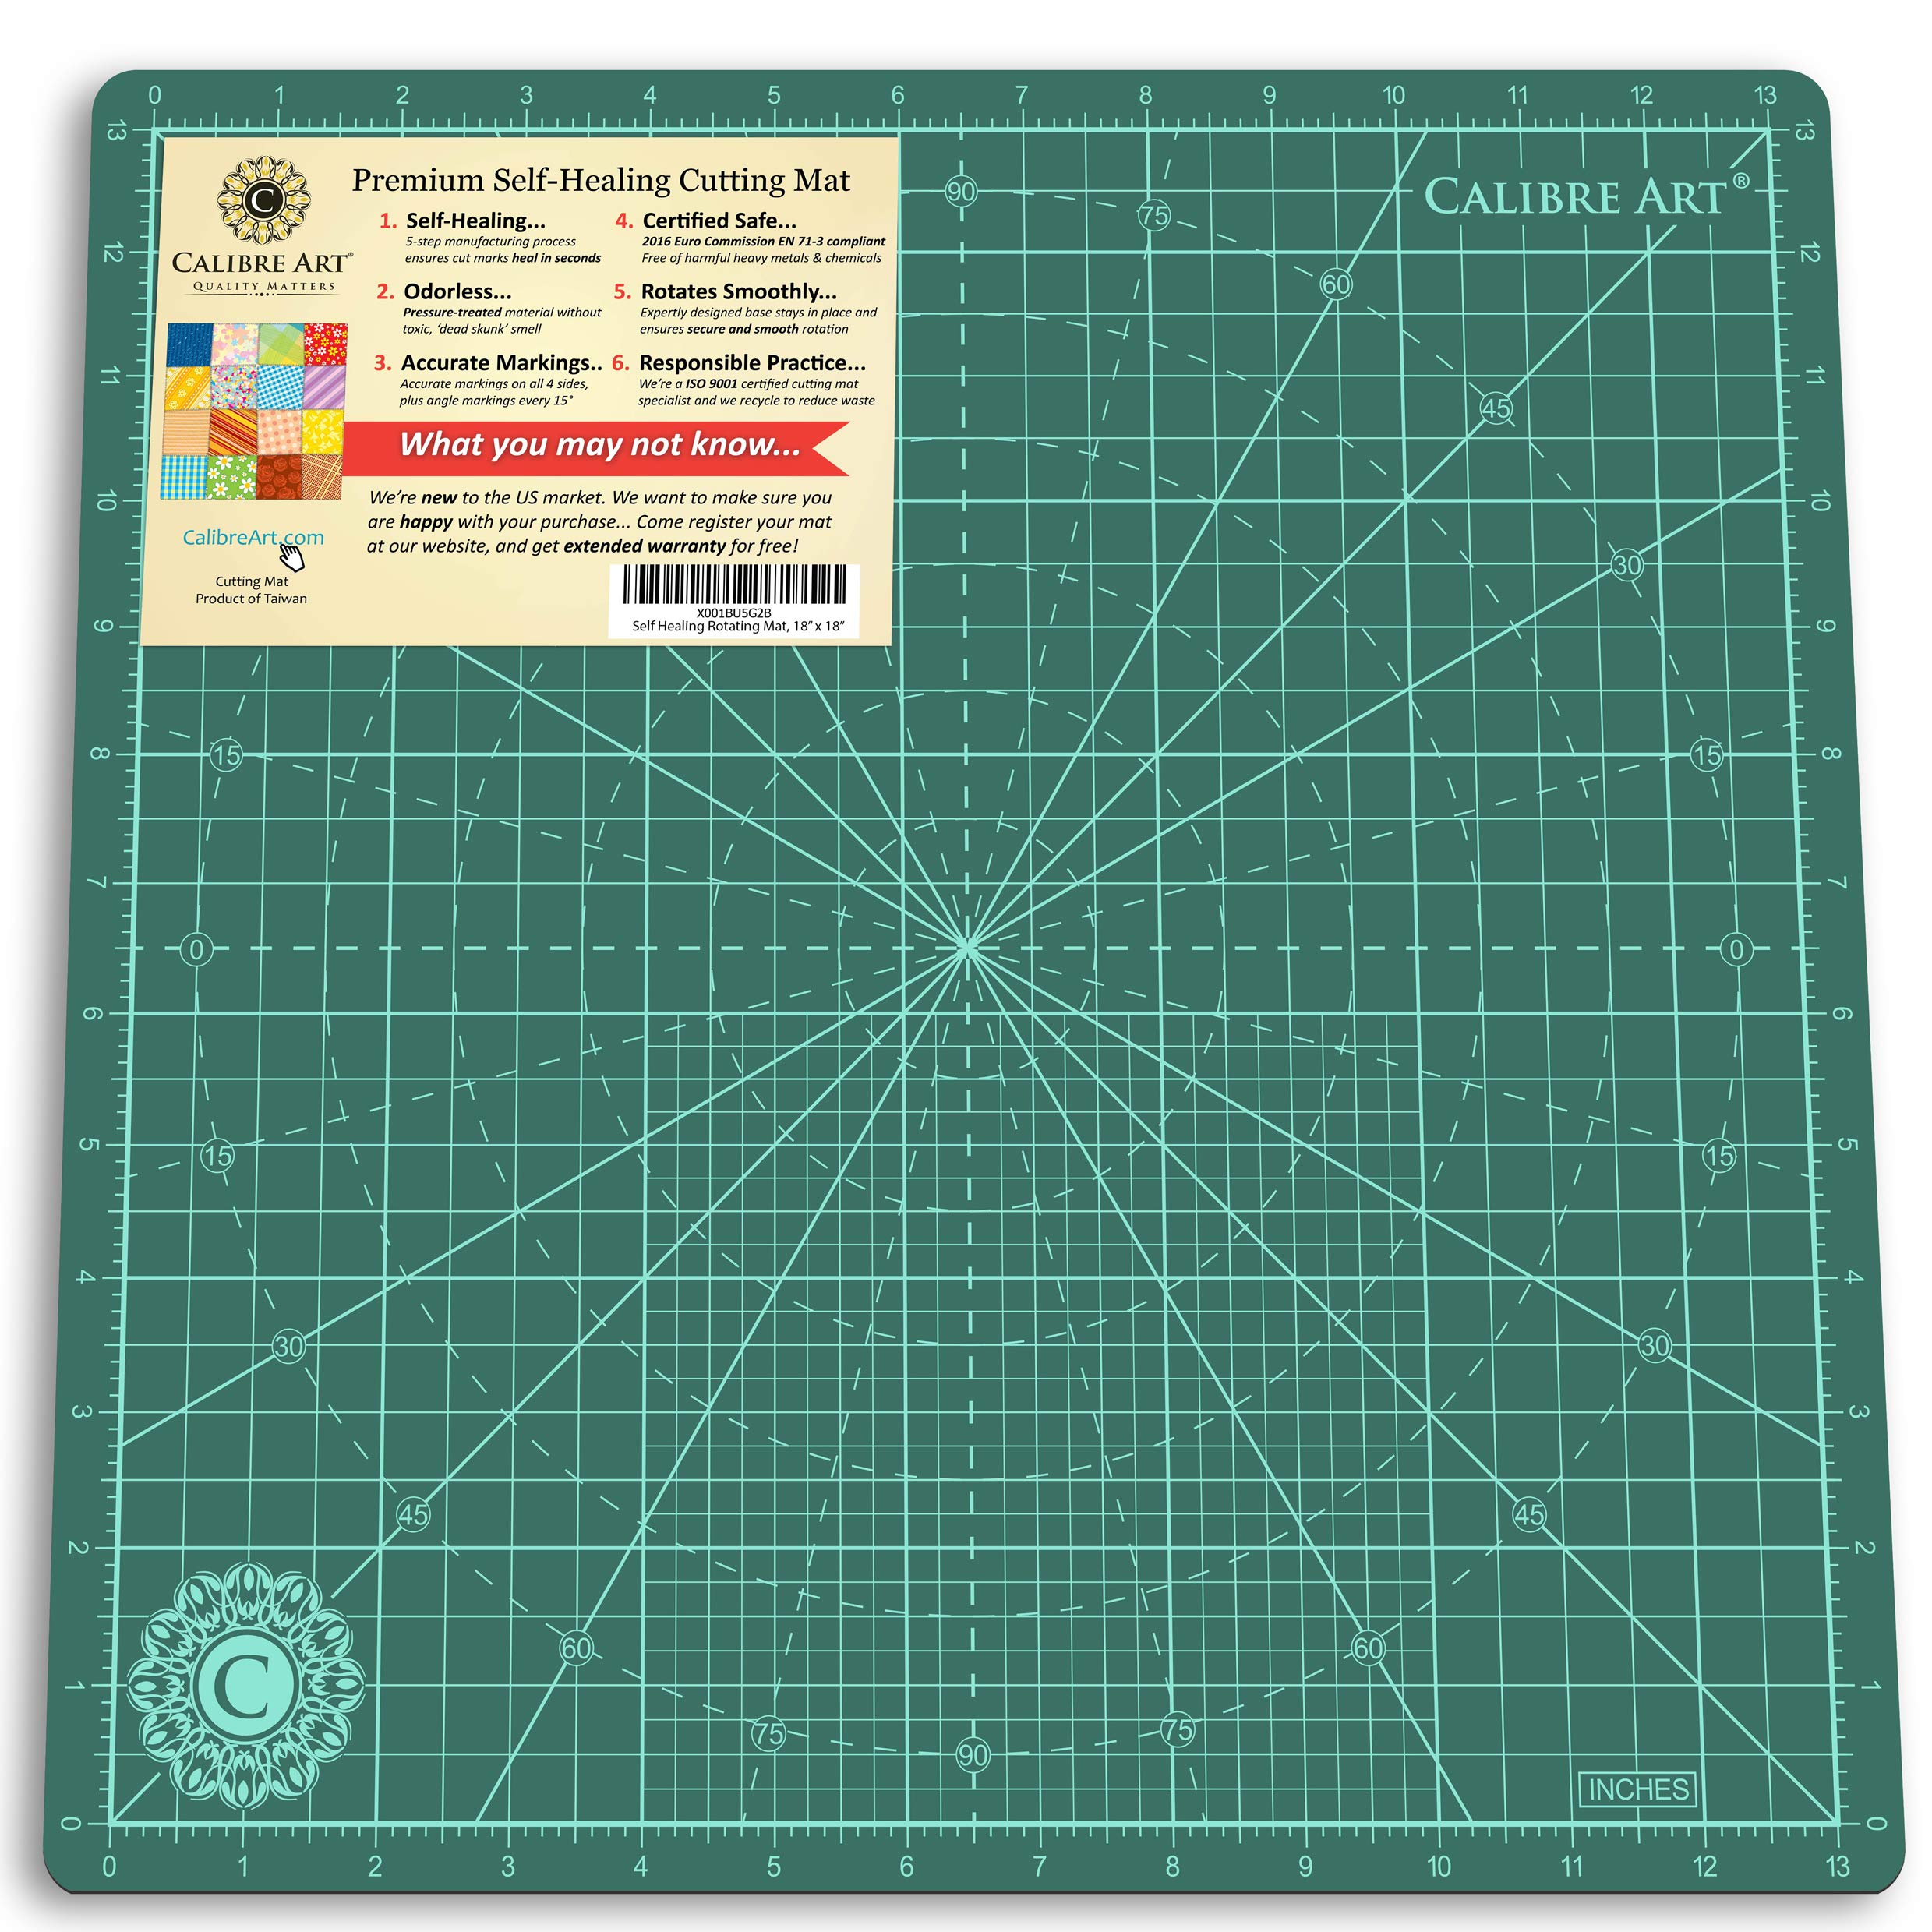 Calibre Art Rotating Self Healing Cutting Mat 14x14 (13 Grid), Perfect for  Quilting & Art Projects 14x14 Green